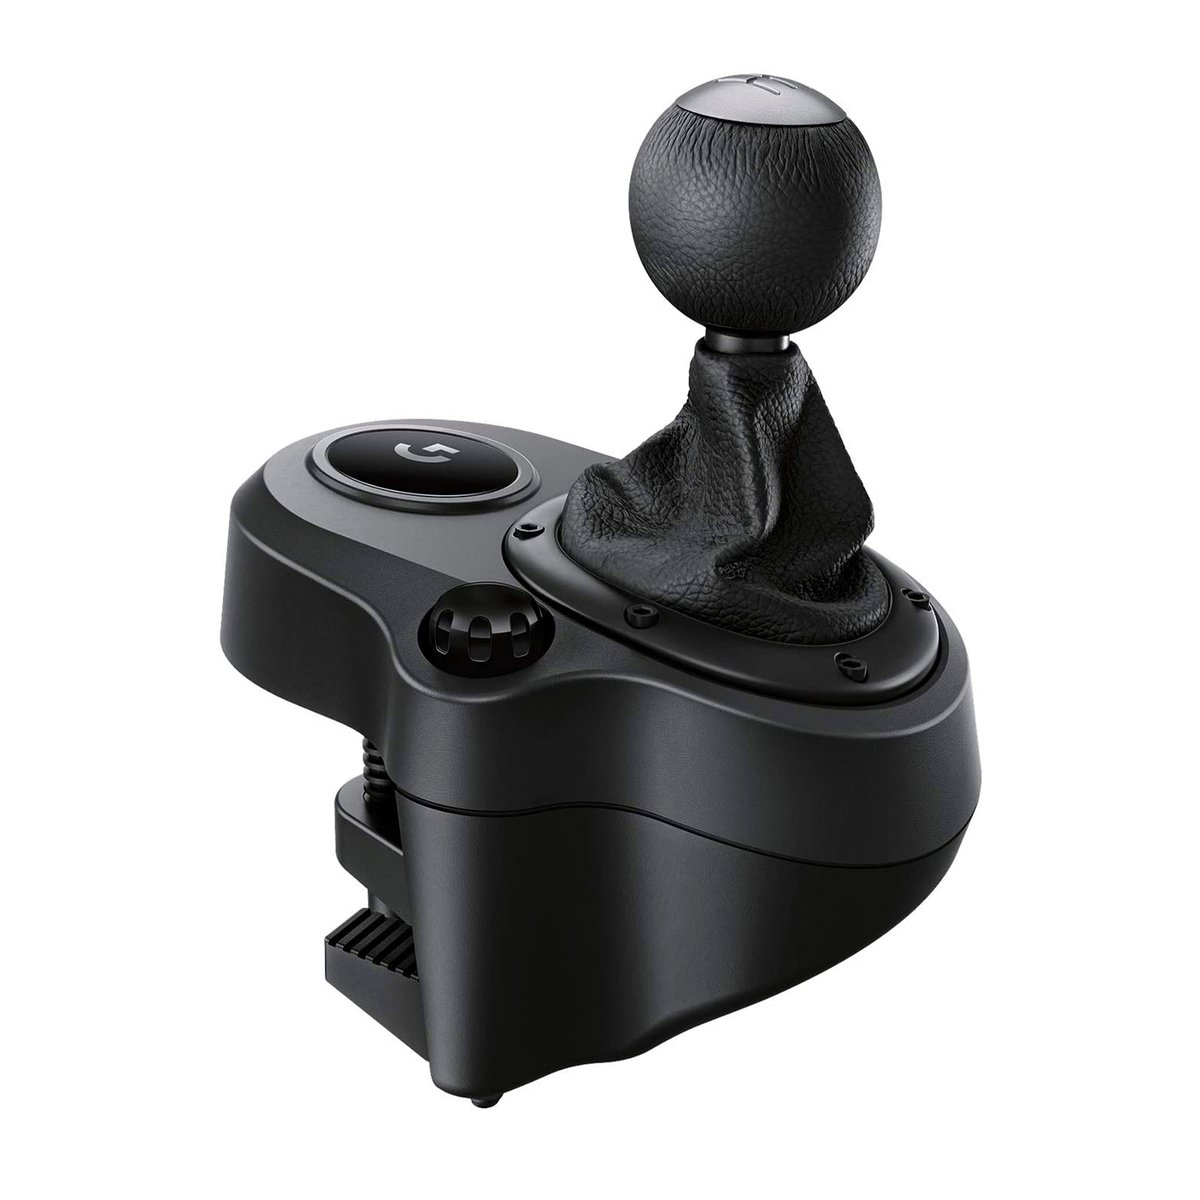 Logitech Driving Force Racing Shifter for G29 and G920 Driving Force Racing Wheels,Black